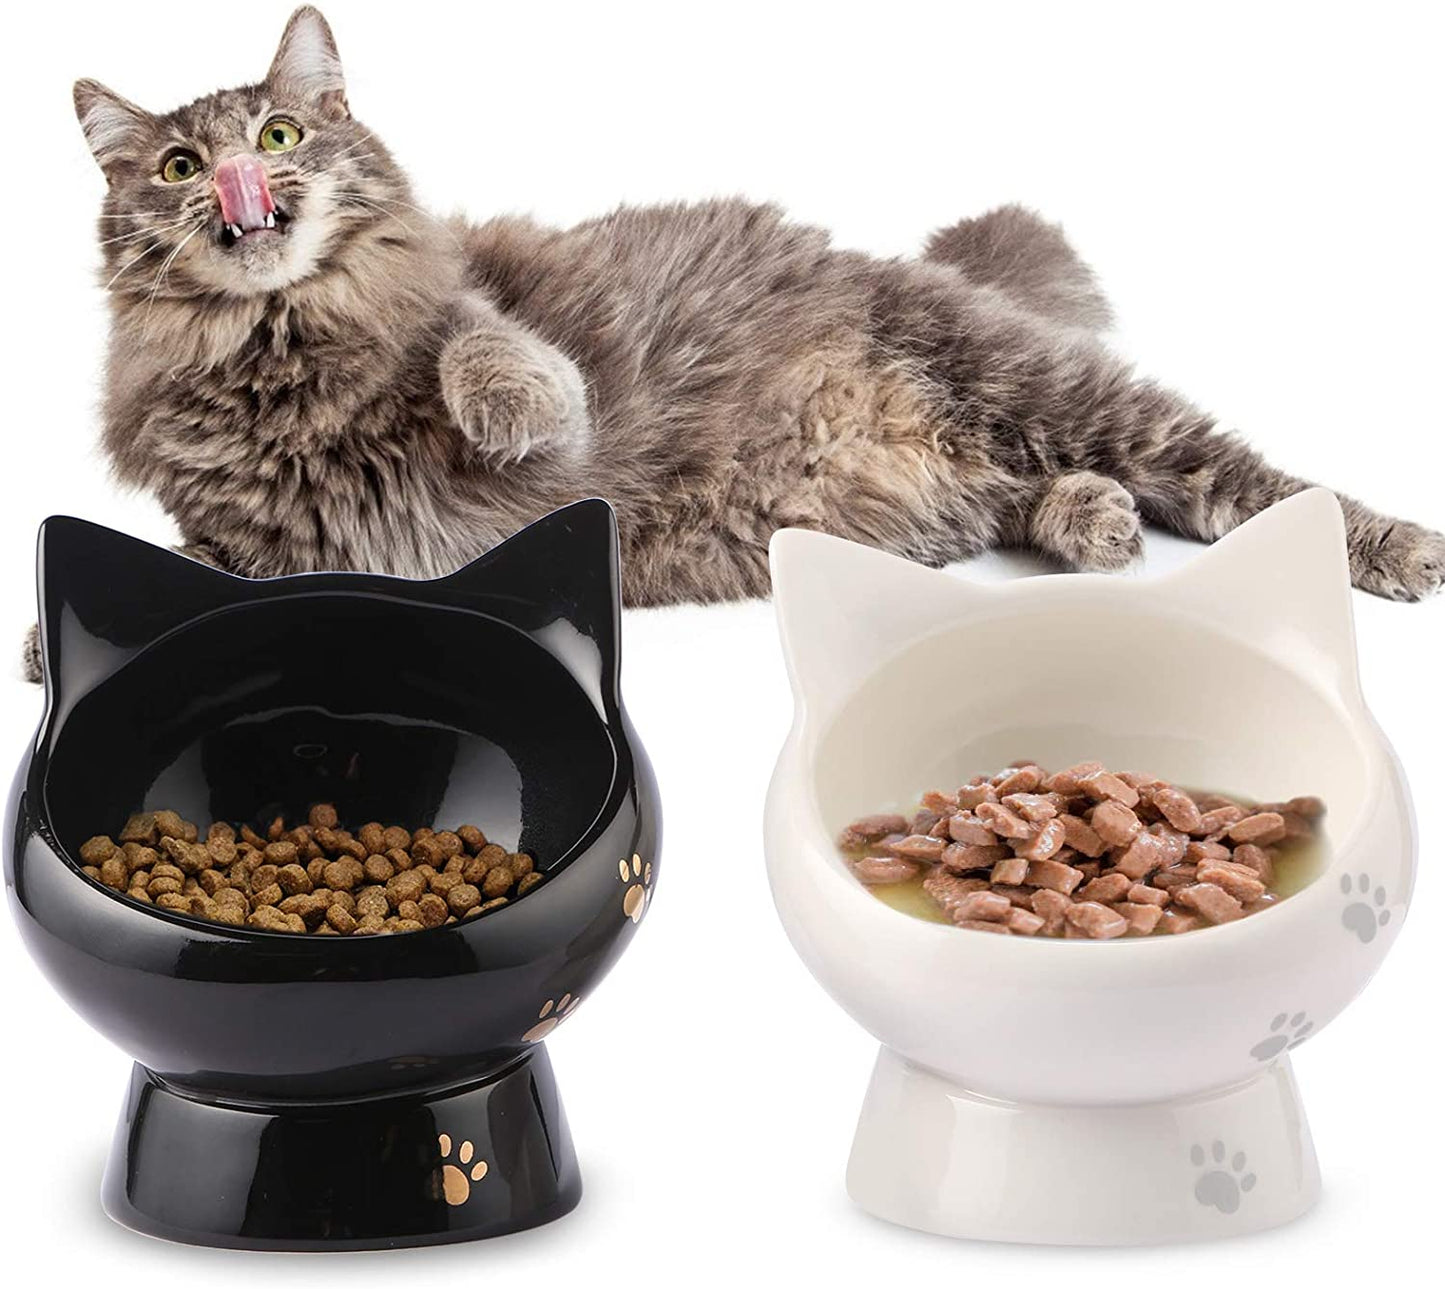 Cat Bowl, Raised Cat Food Bowls anti Vomiting, Handmade Elevated Cat Bowl, Ceramic Pet Food Bowl for Flat-Faced Cats, Small Dogs, Protect Pet'S Spine,Dishwasher Safe, Black and White, 2Pcs (Bowl-2)